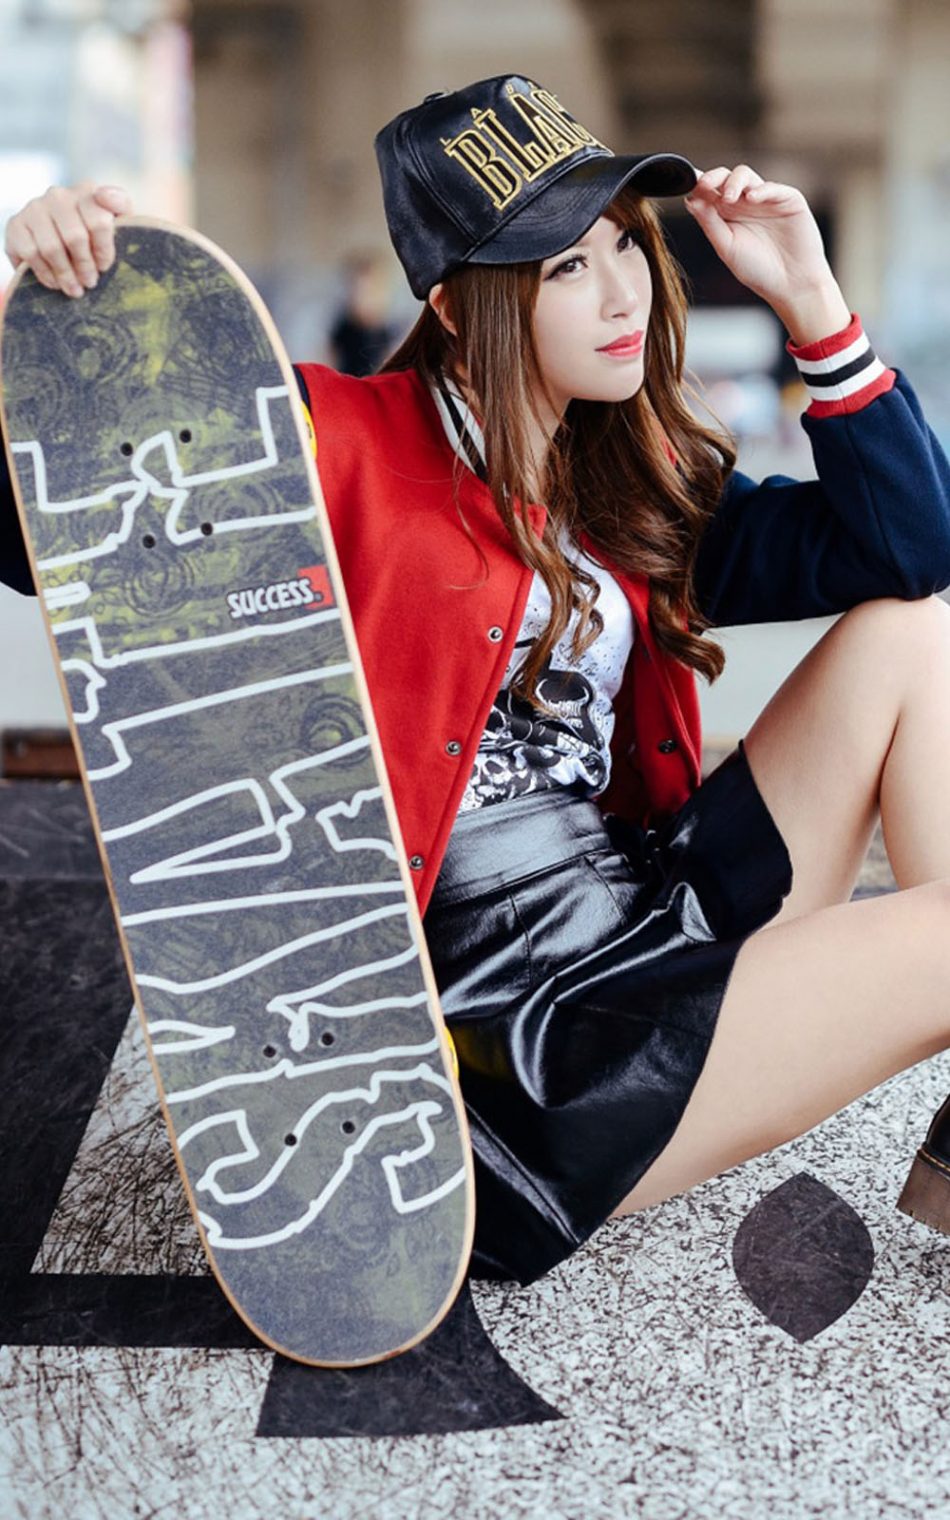 Cute Asian Babe With Skateboard HD Mobile Wallpaper